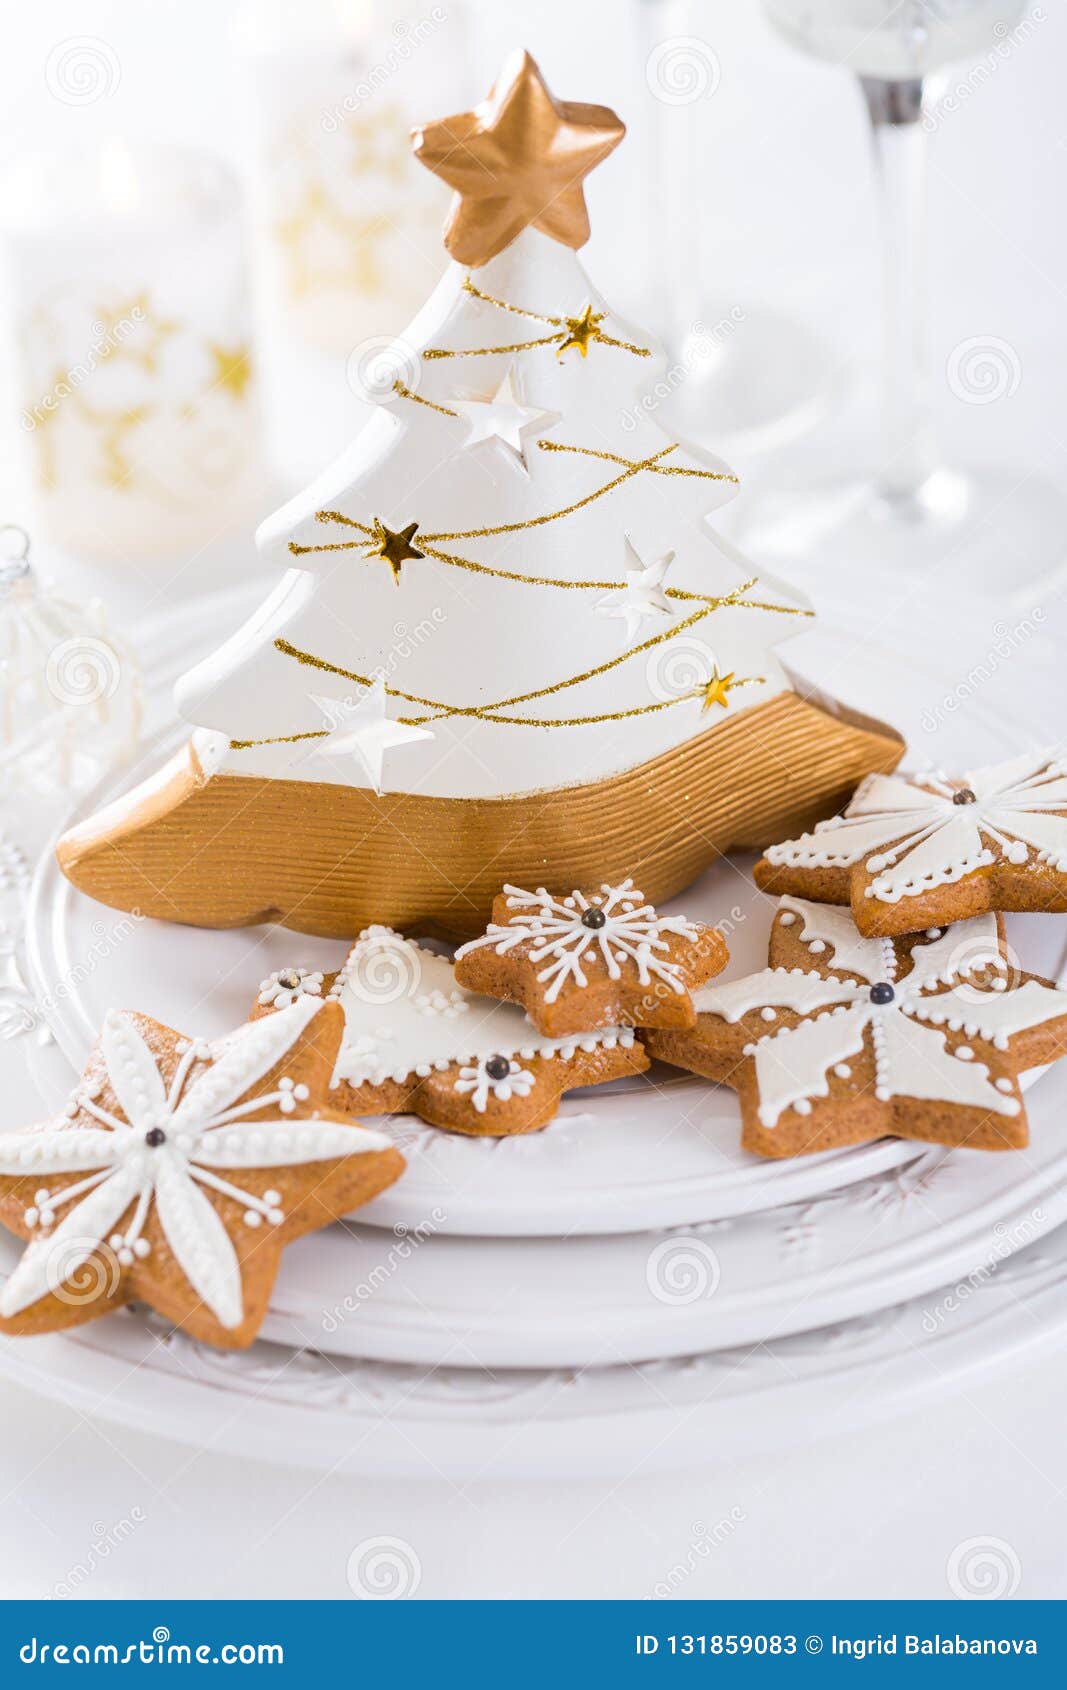 Traditional Gingerbread Cookies for Christmas Stock Image - Image of ...